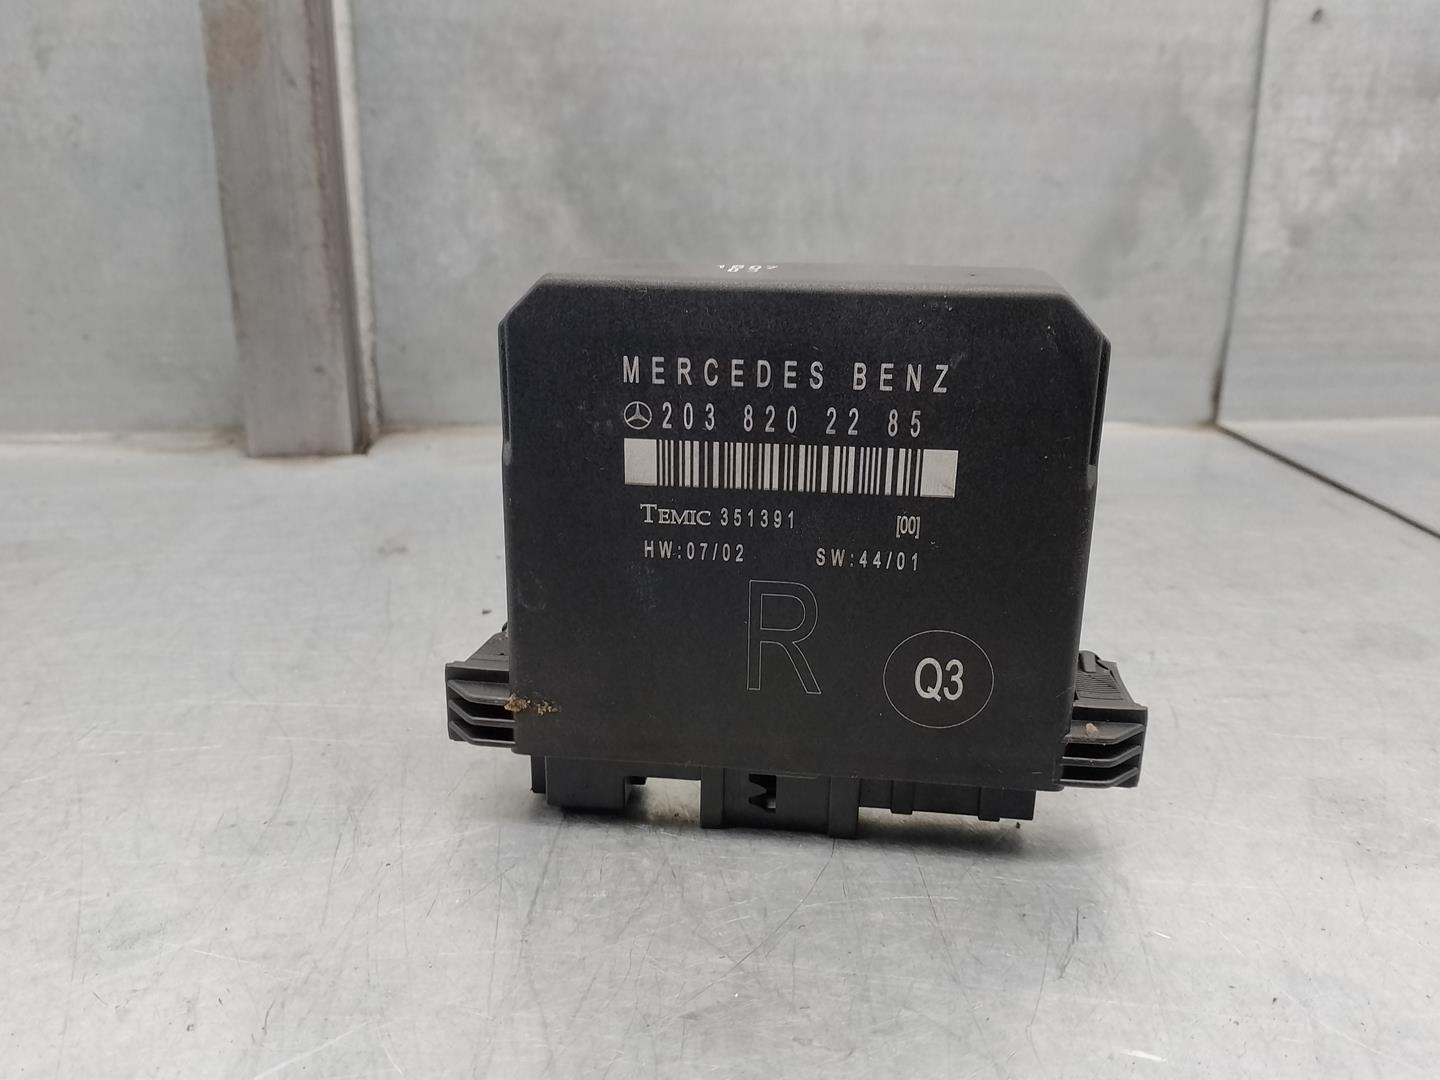 MERCEDES-BENZ C-Class W203/S203/CL203 (2000-2008) Other Control Units 2038202285, 351391, TEMIC 24179297